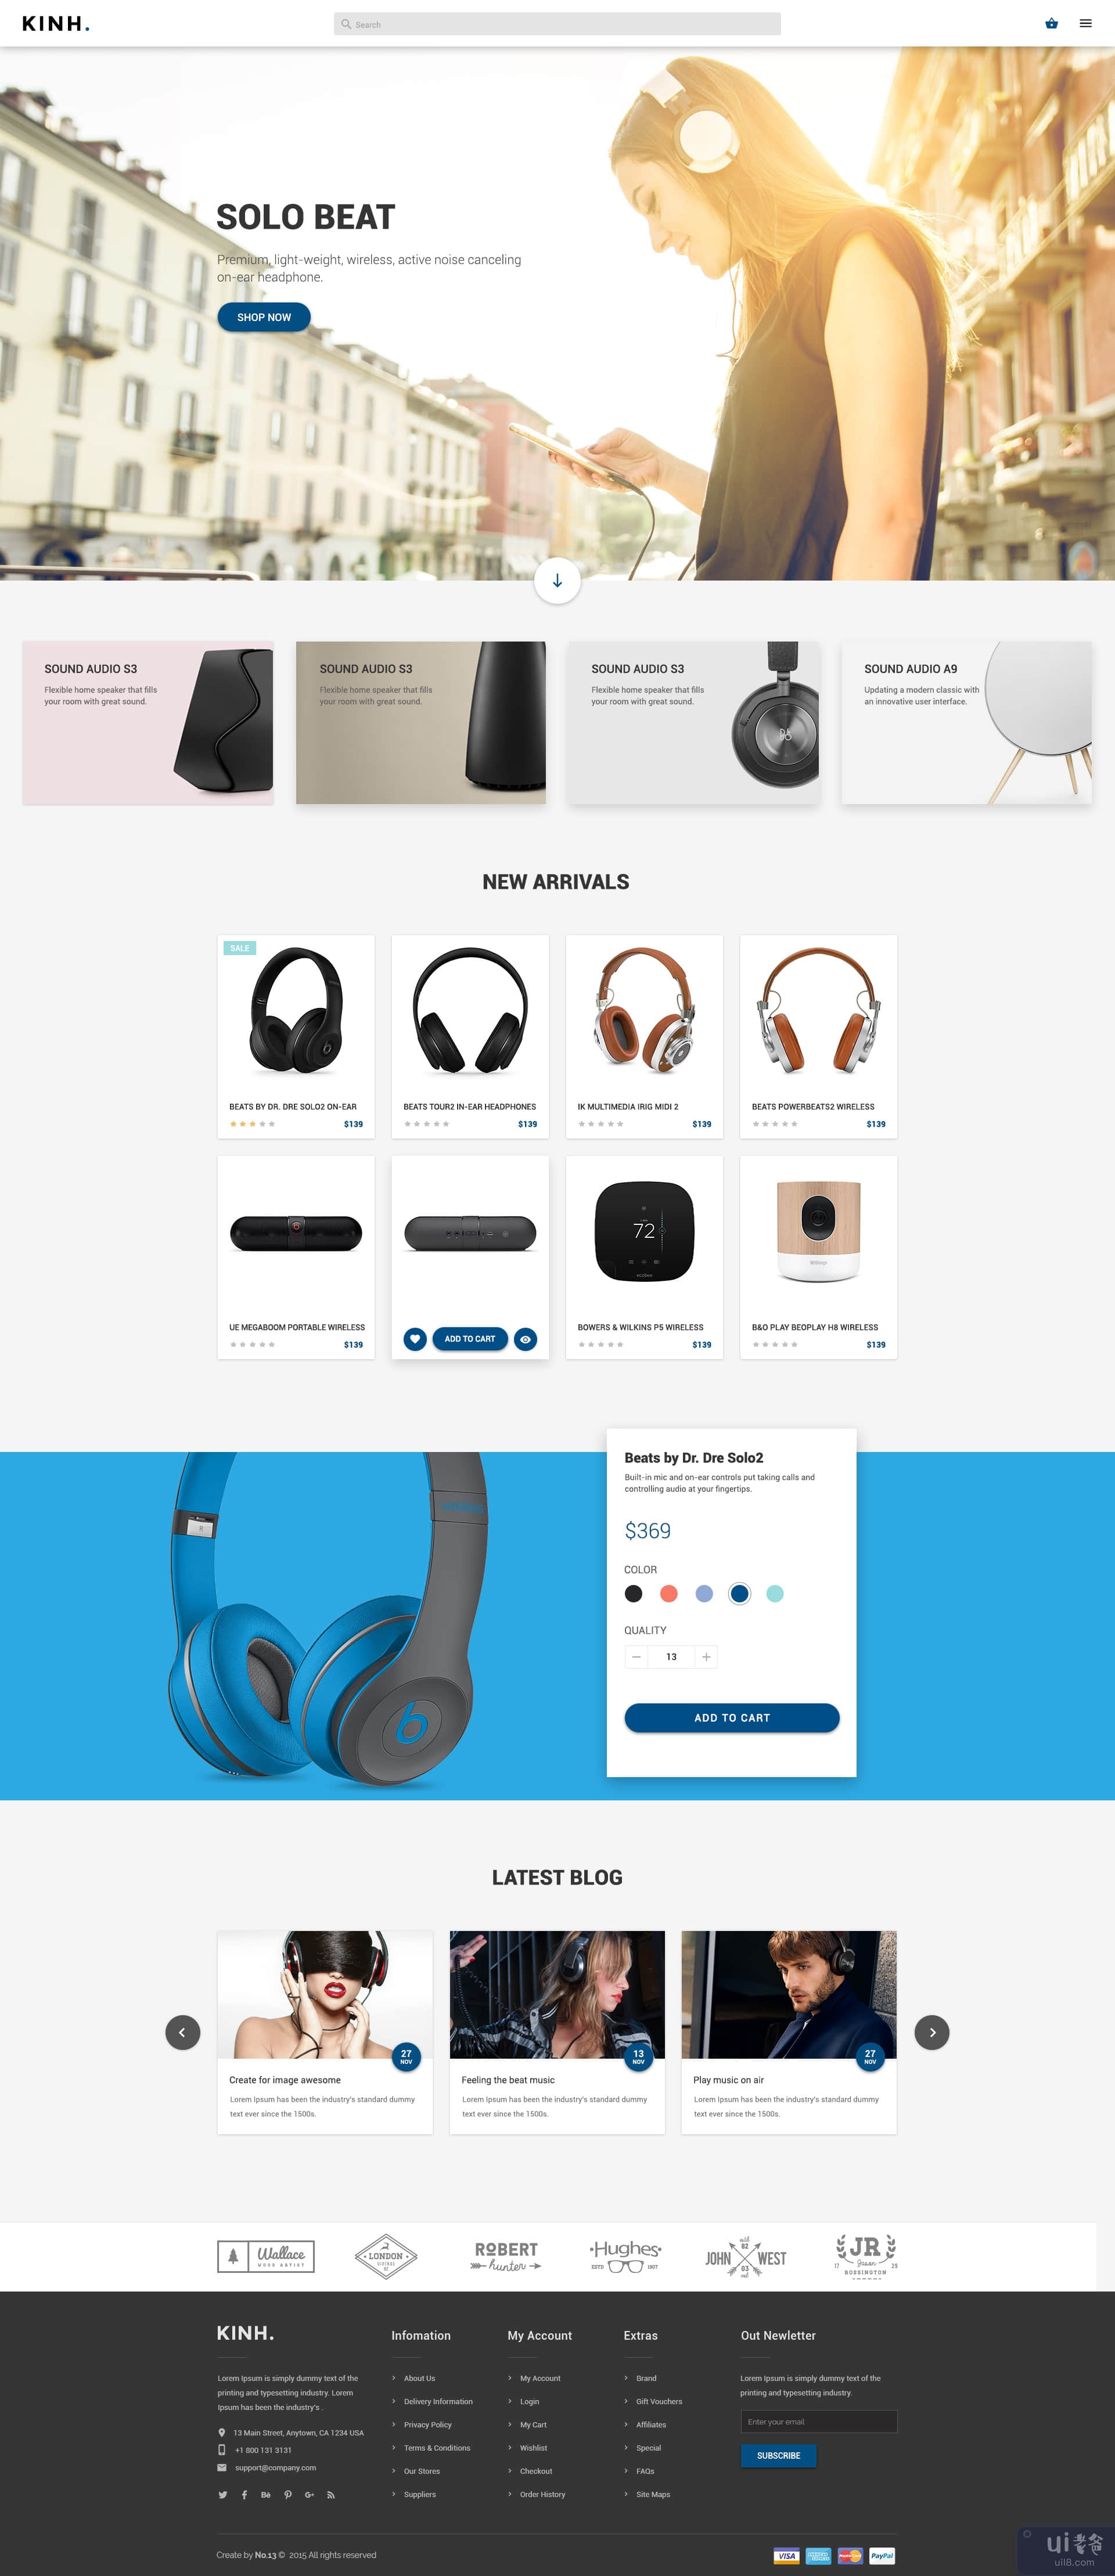 Kinh - 材料电子商务 PSD 模板(Kinh - Material E-Commerce PSD Template)插图18